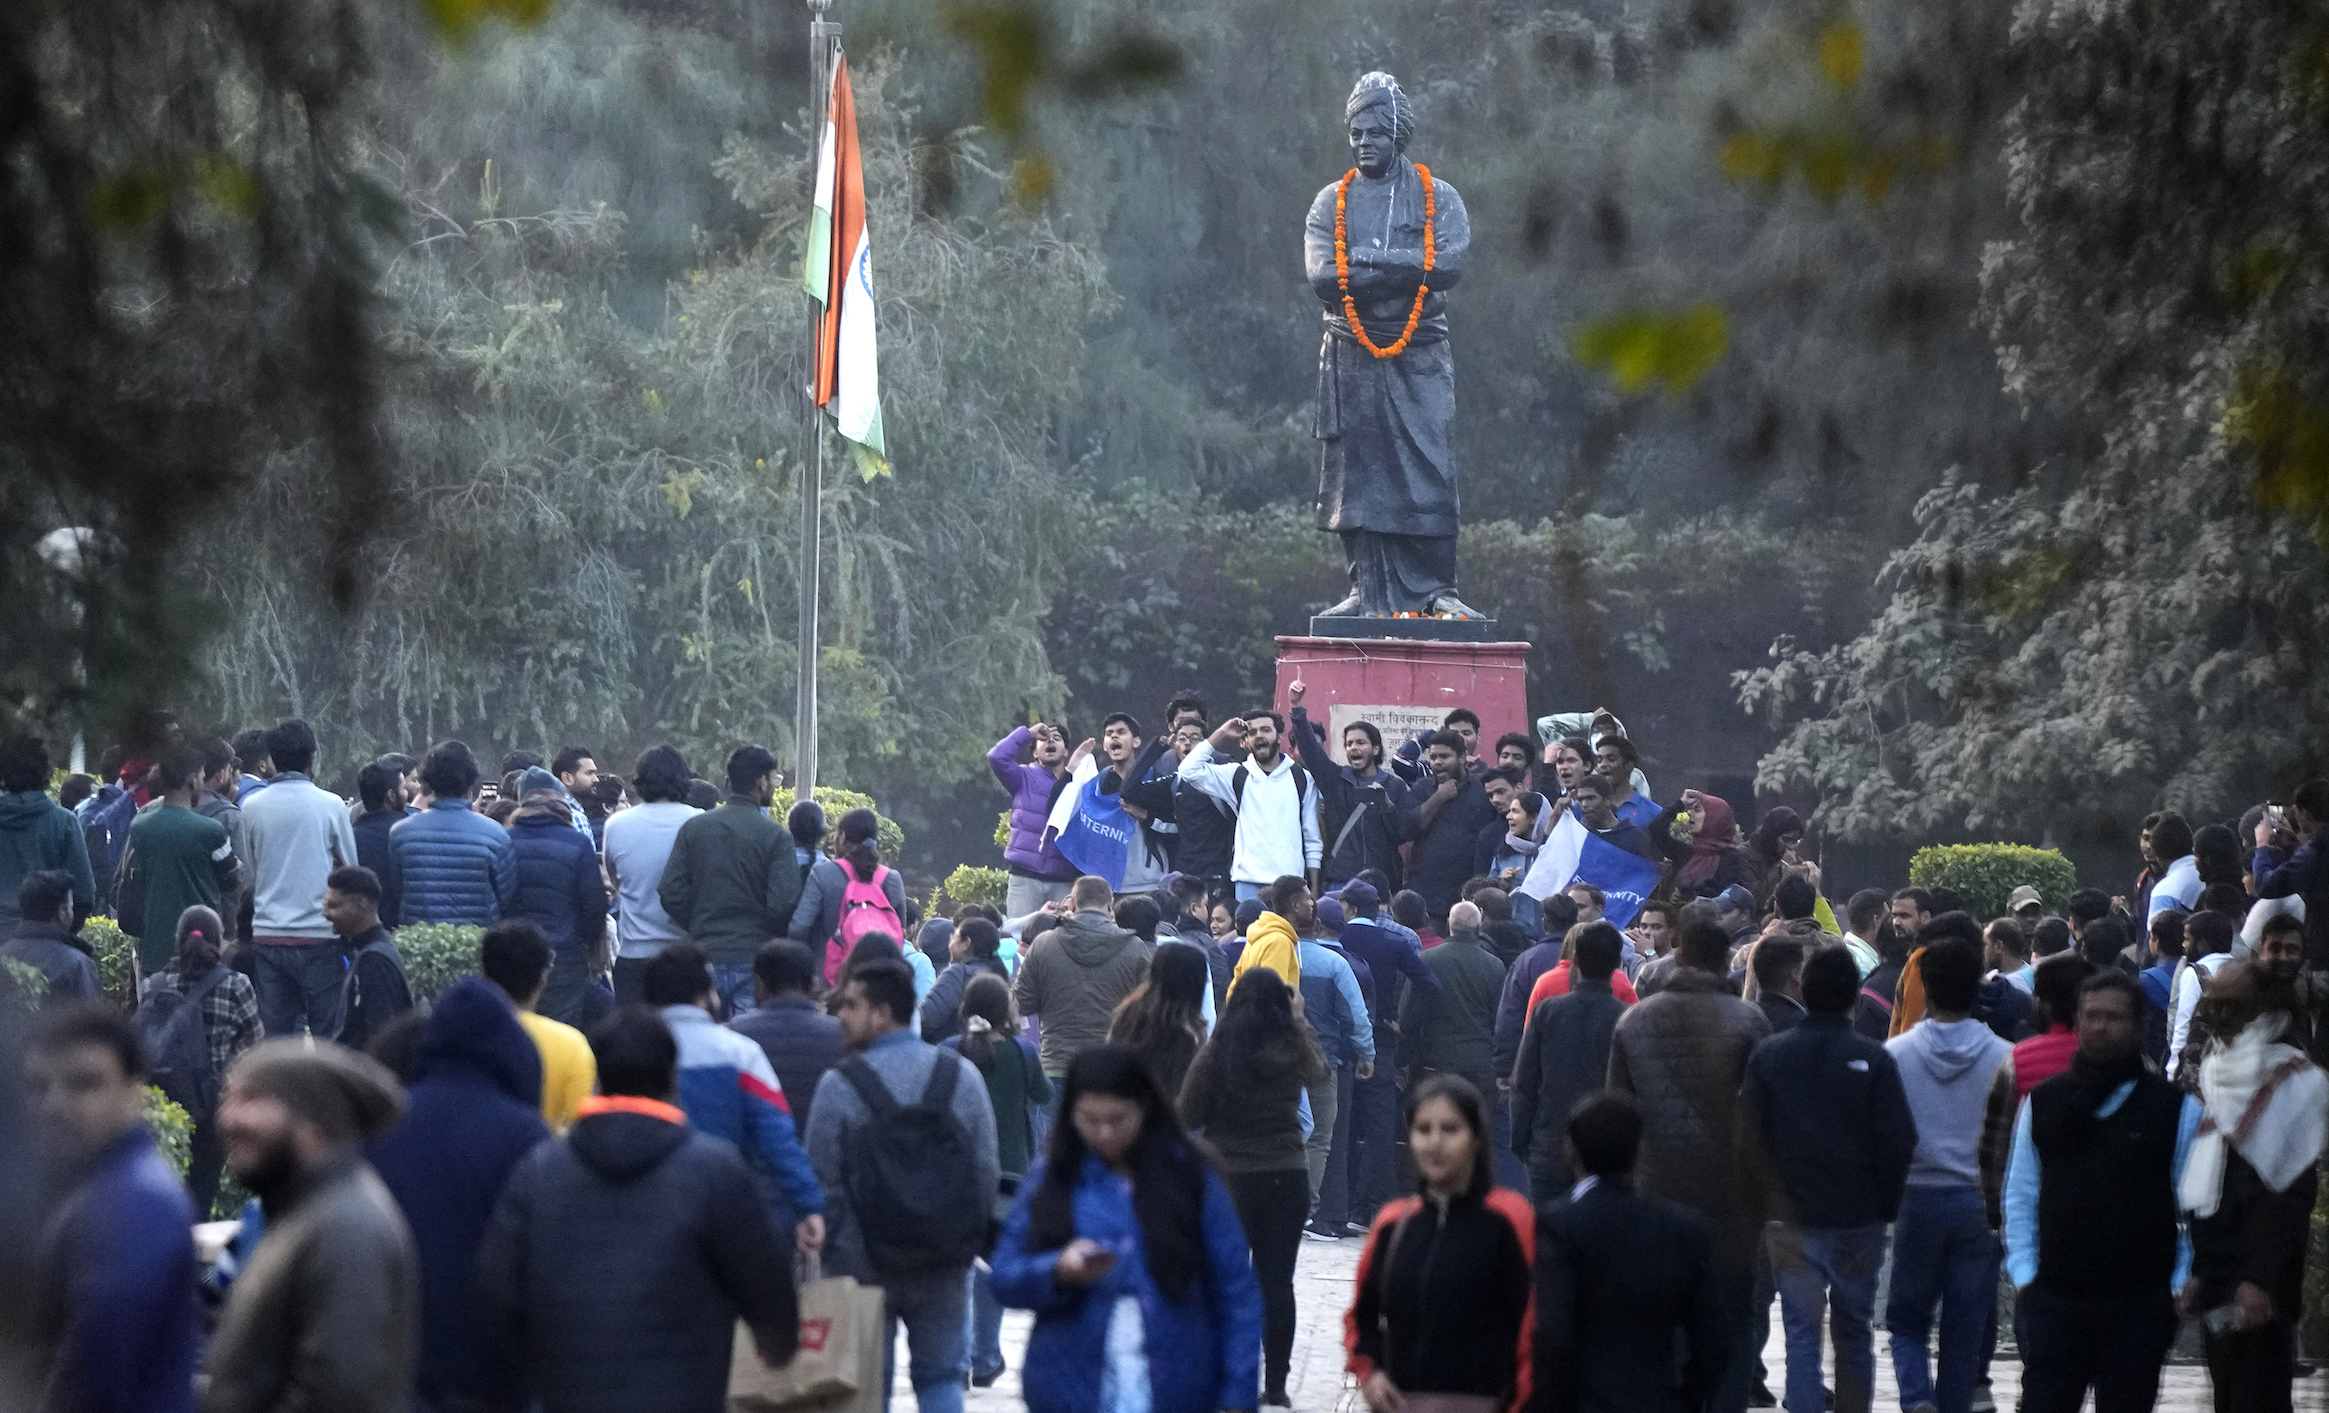 A group of students shout anti-government slogans as they are not allowed to screen a BBC documentary at Delhi University campus in New Delhi, India, Friday, Jan. 27, 2023